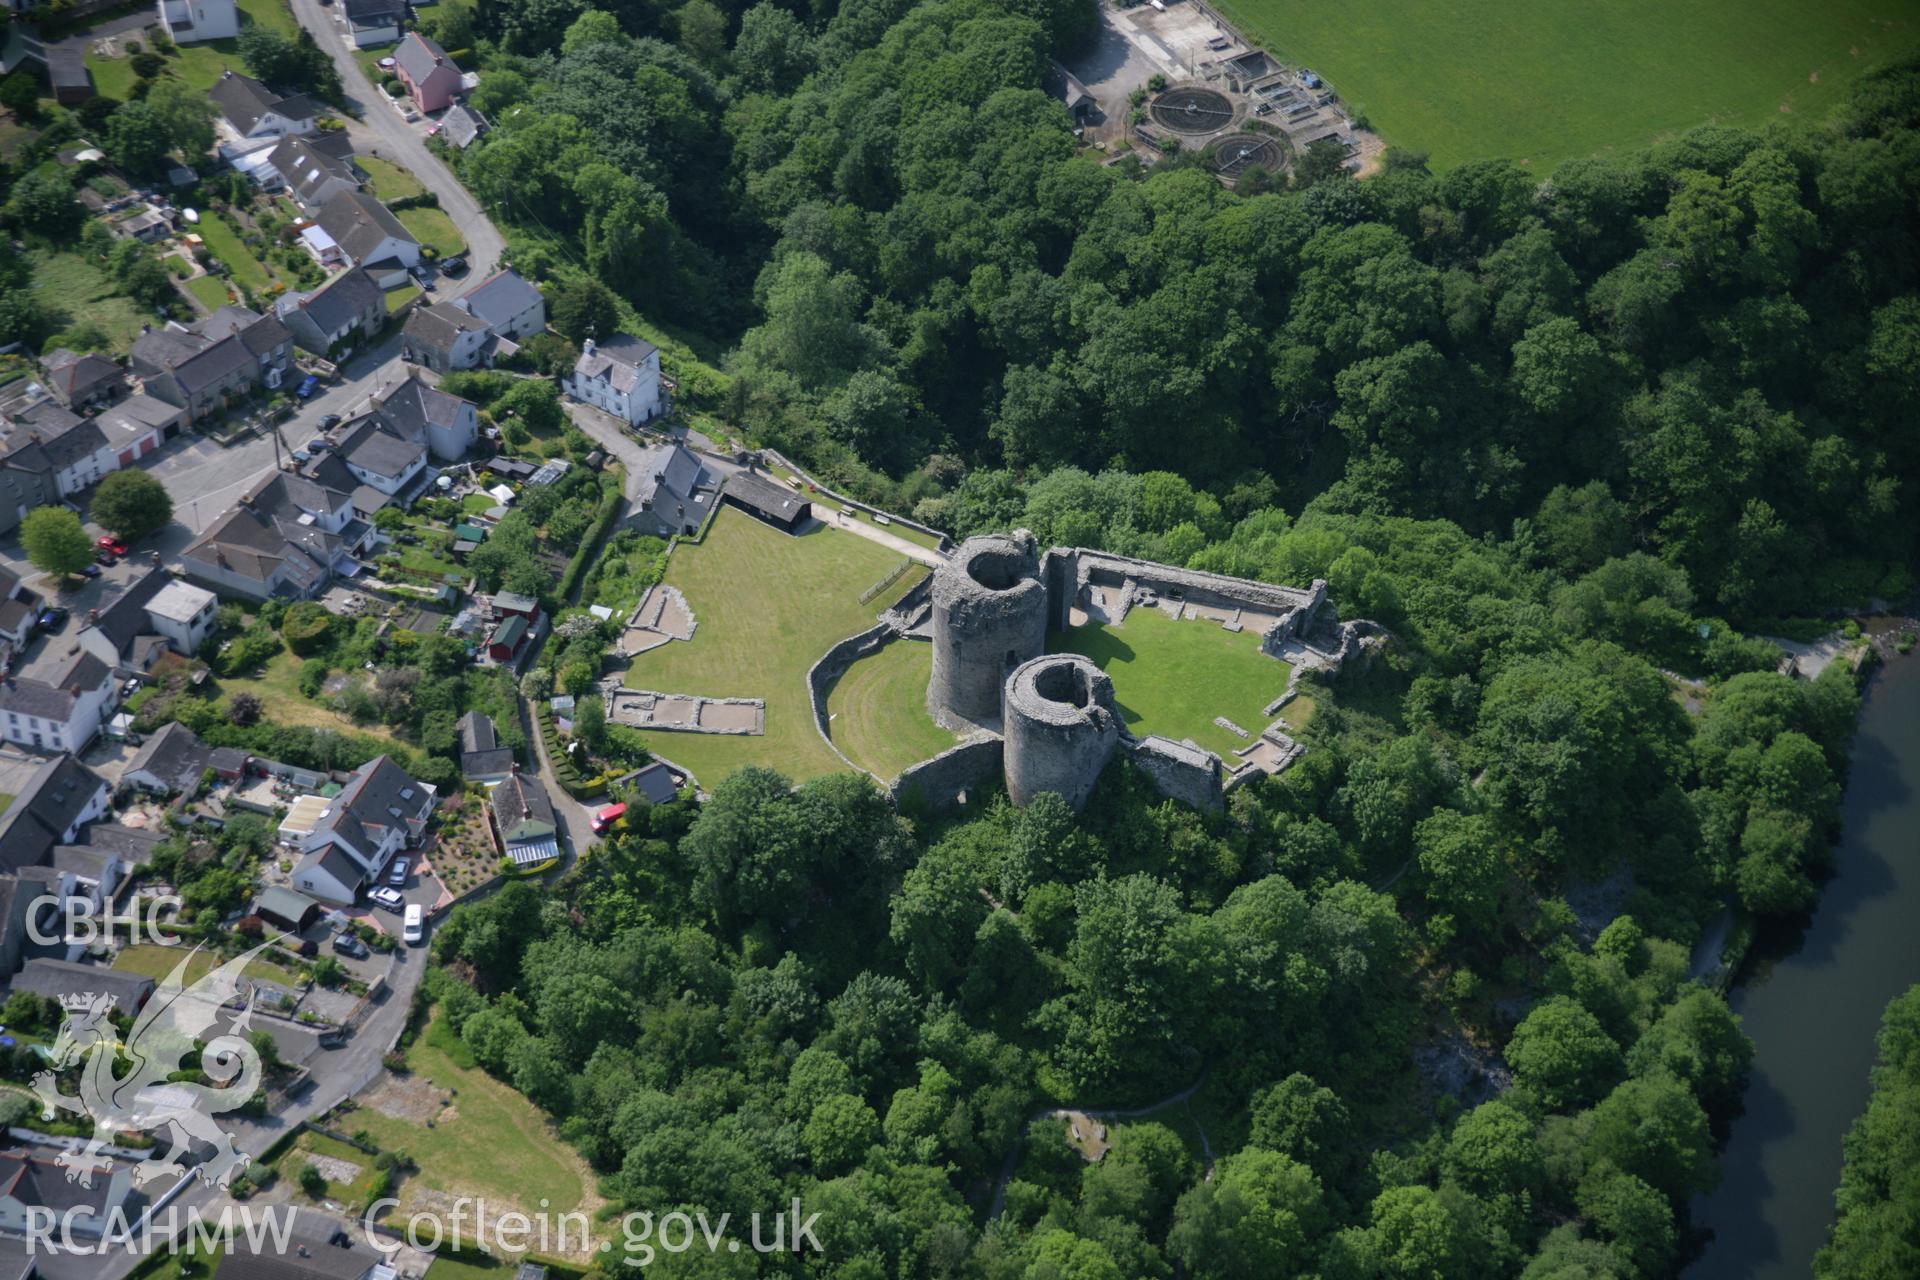 RCAHMW colour oblique aerial photograph of Cilgerran Castle. From the south-east. Taken on 08 June 2006 by Toby Driver.